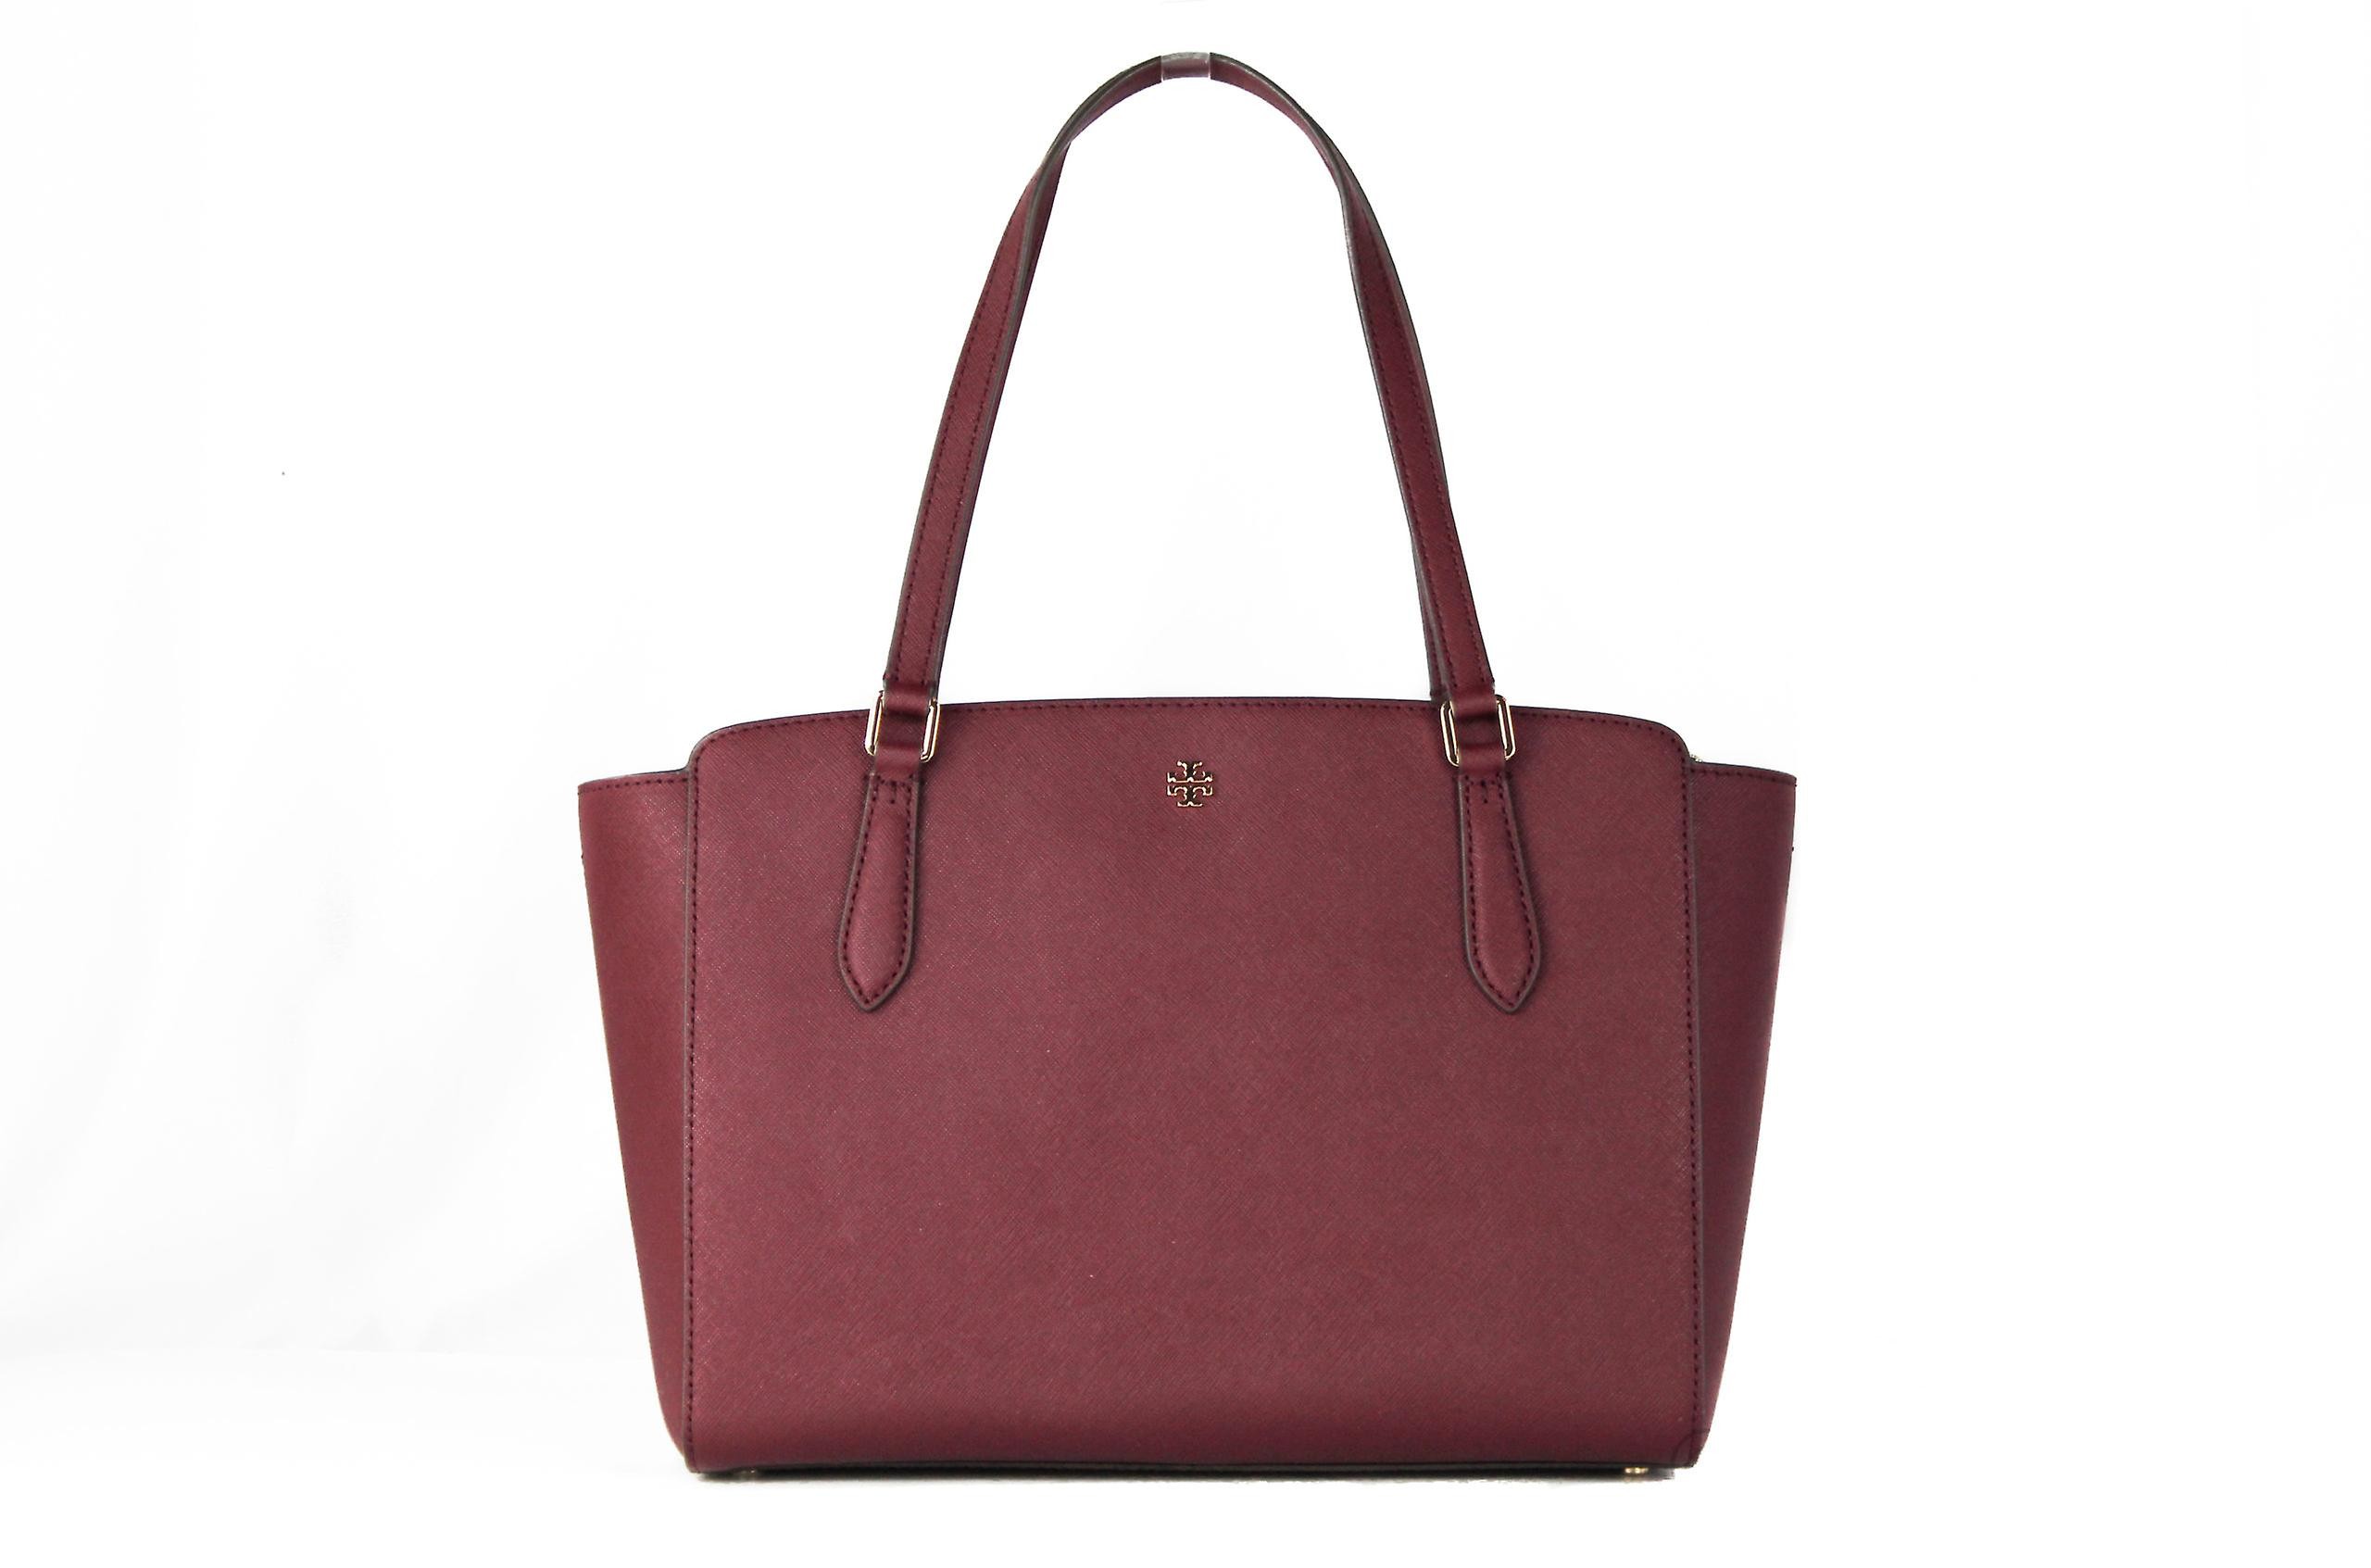 AzuraMart - Tory Burch Emerson Tote With Long Strap - Claret - Small 64188